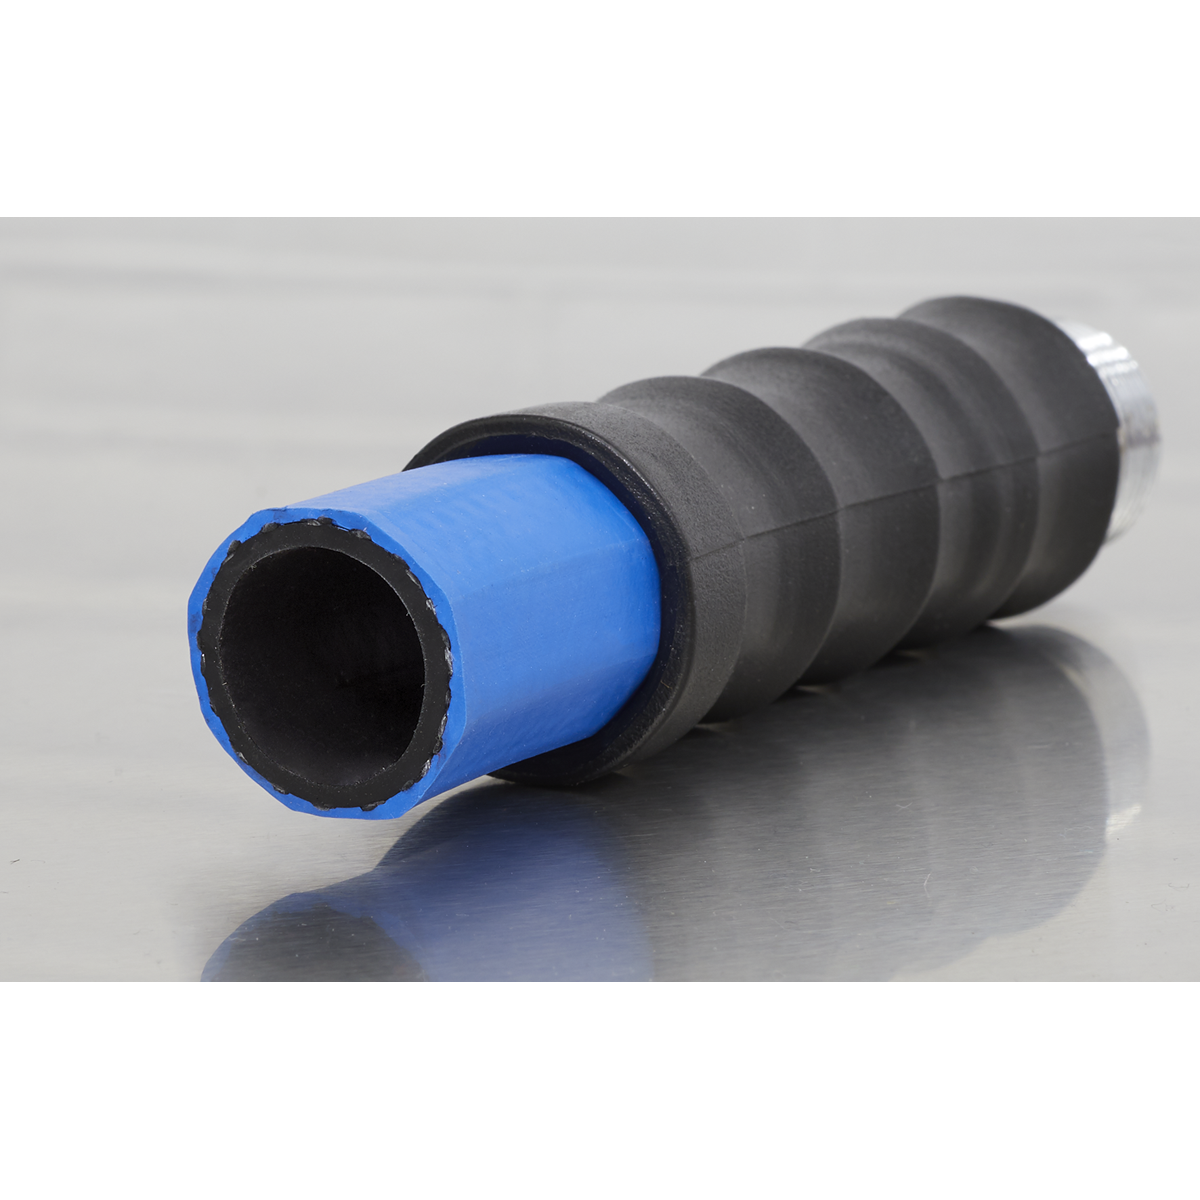 Sealey durable water hose